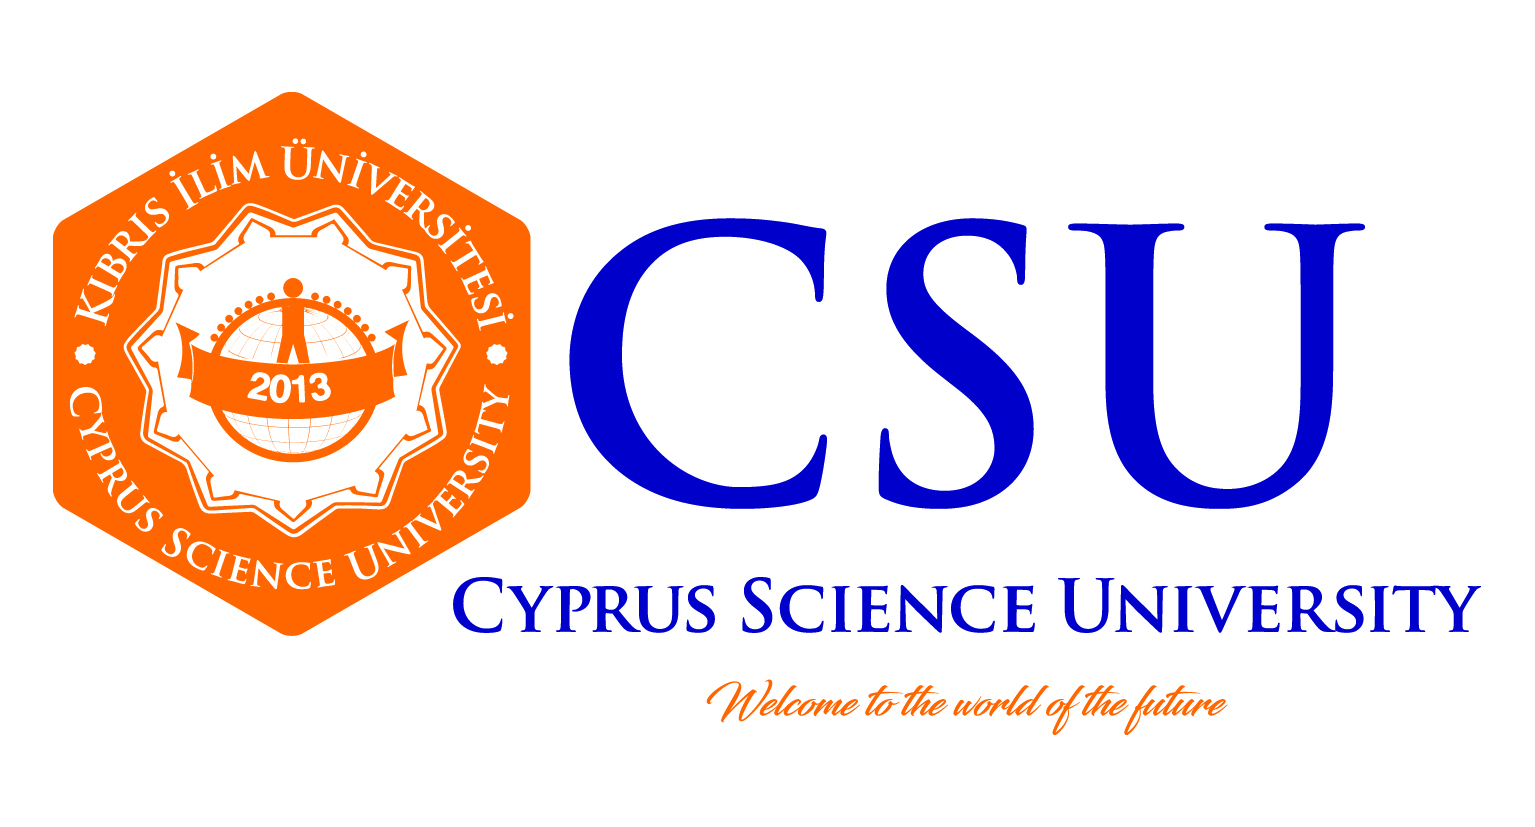 MOU signed with Cyprus Science University